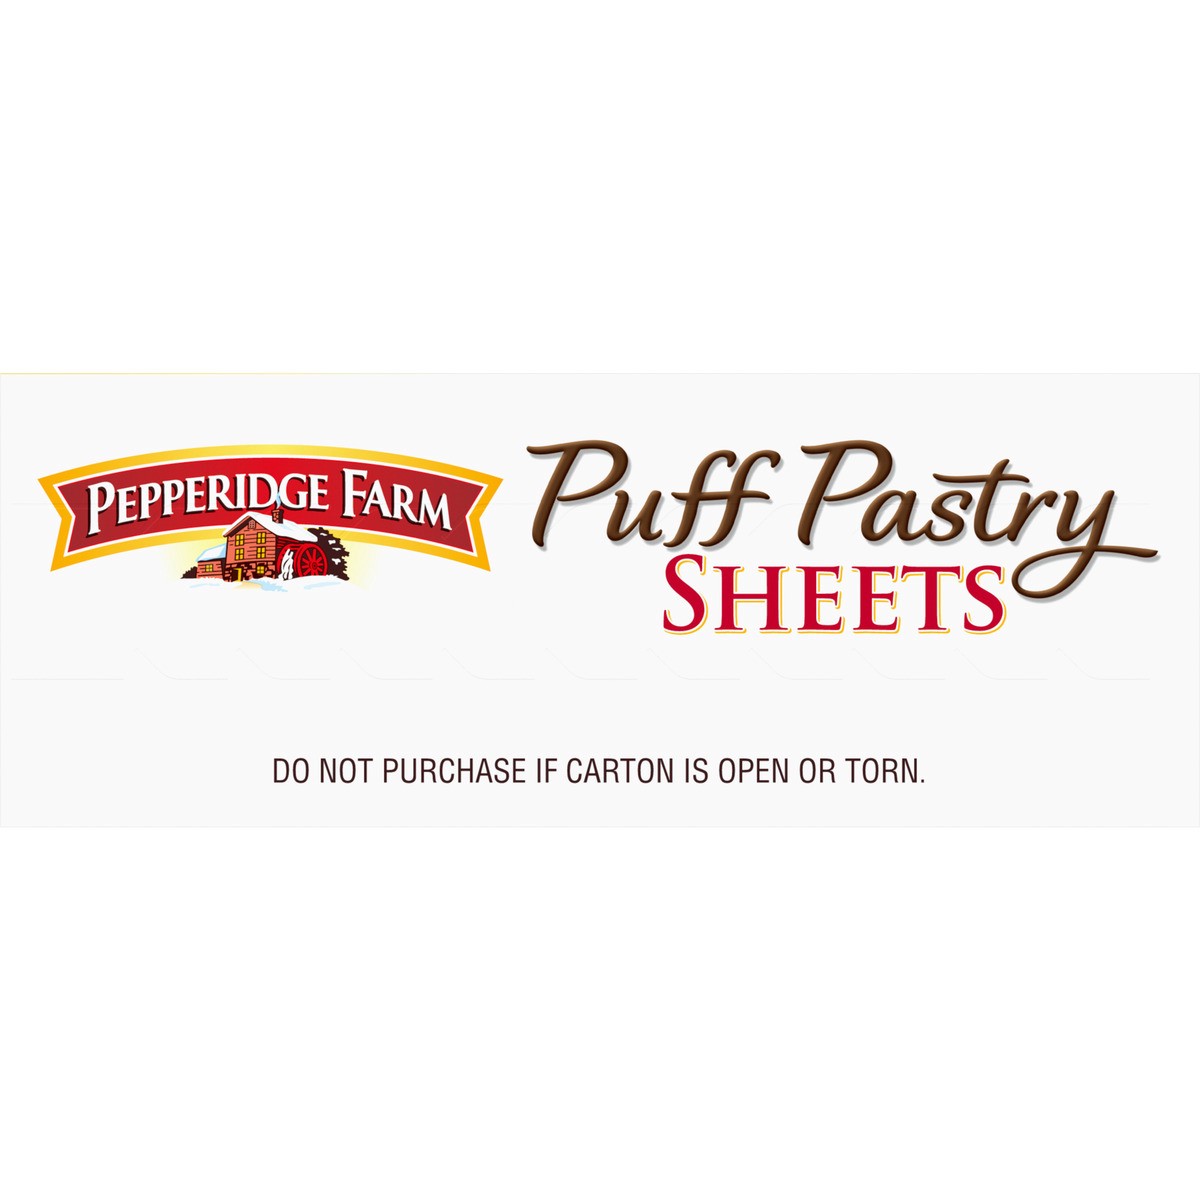 Bowl & Basket Puff Pastry Sheets, 2 count, 17.3 oz